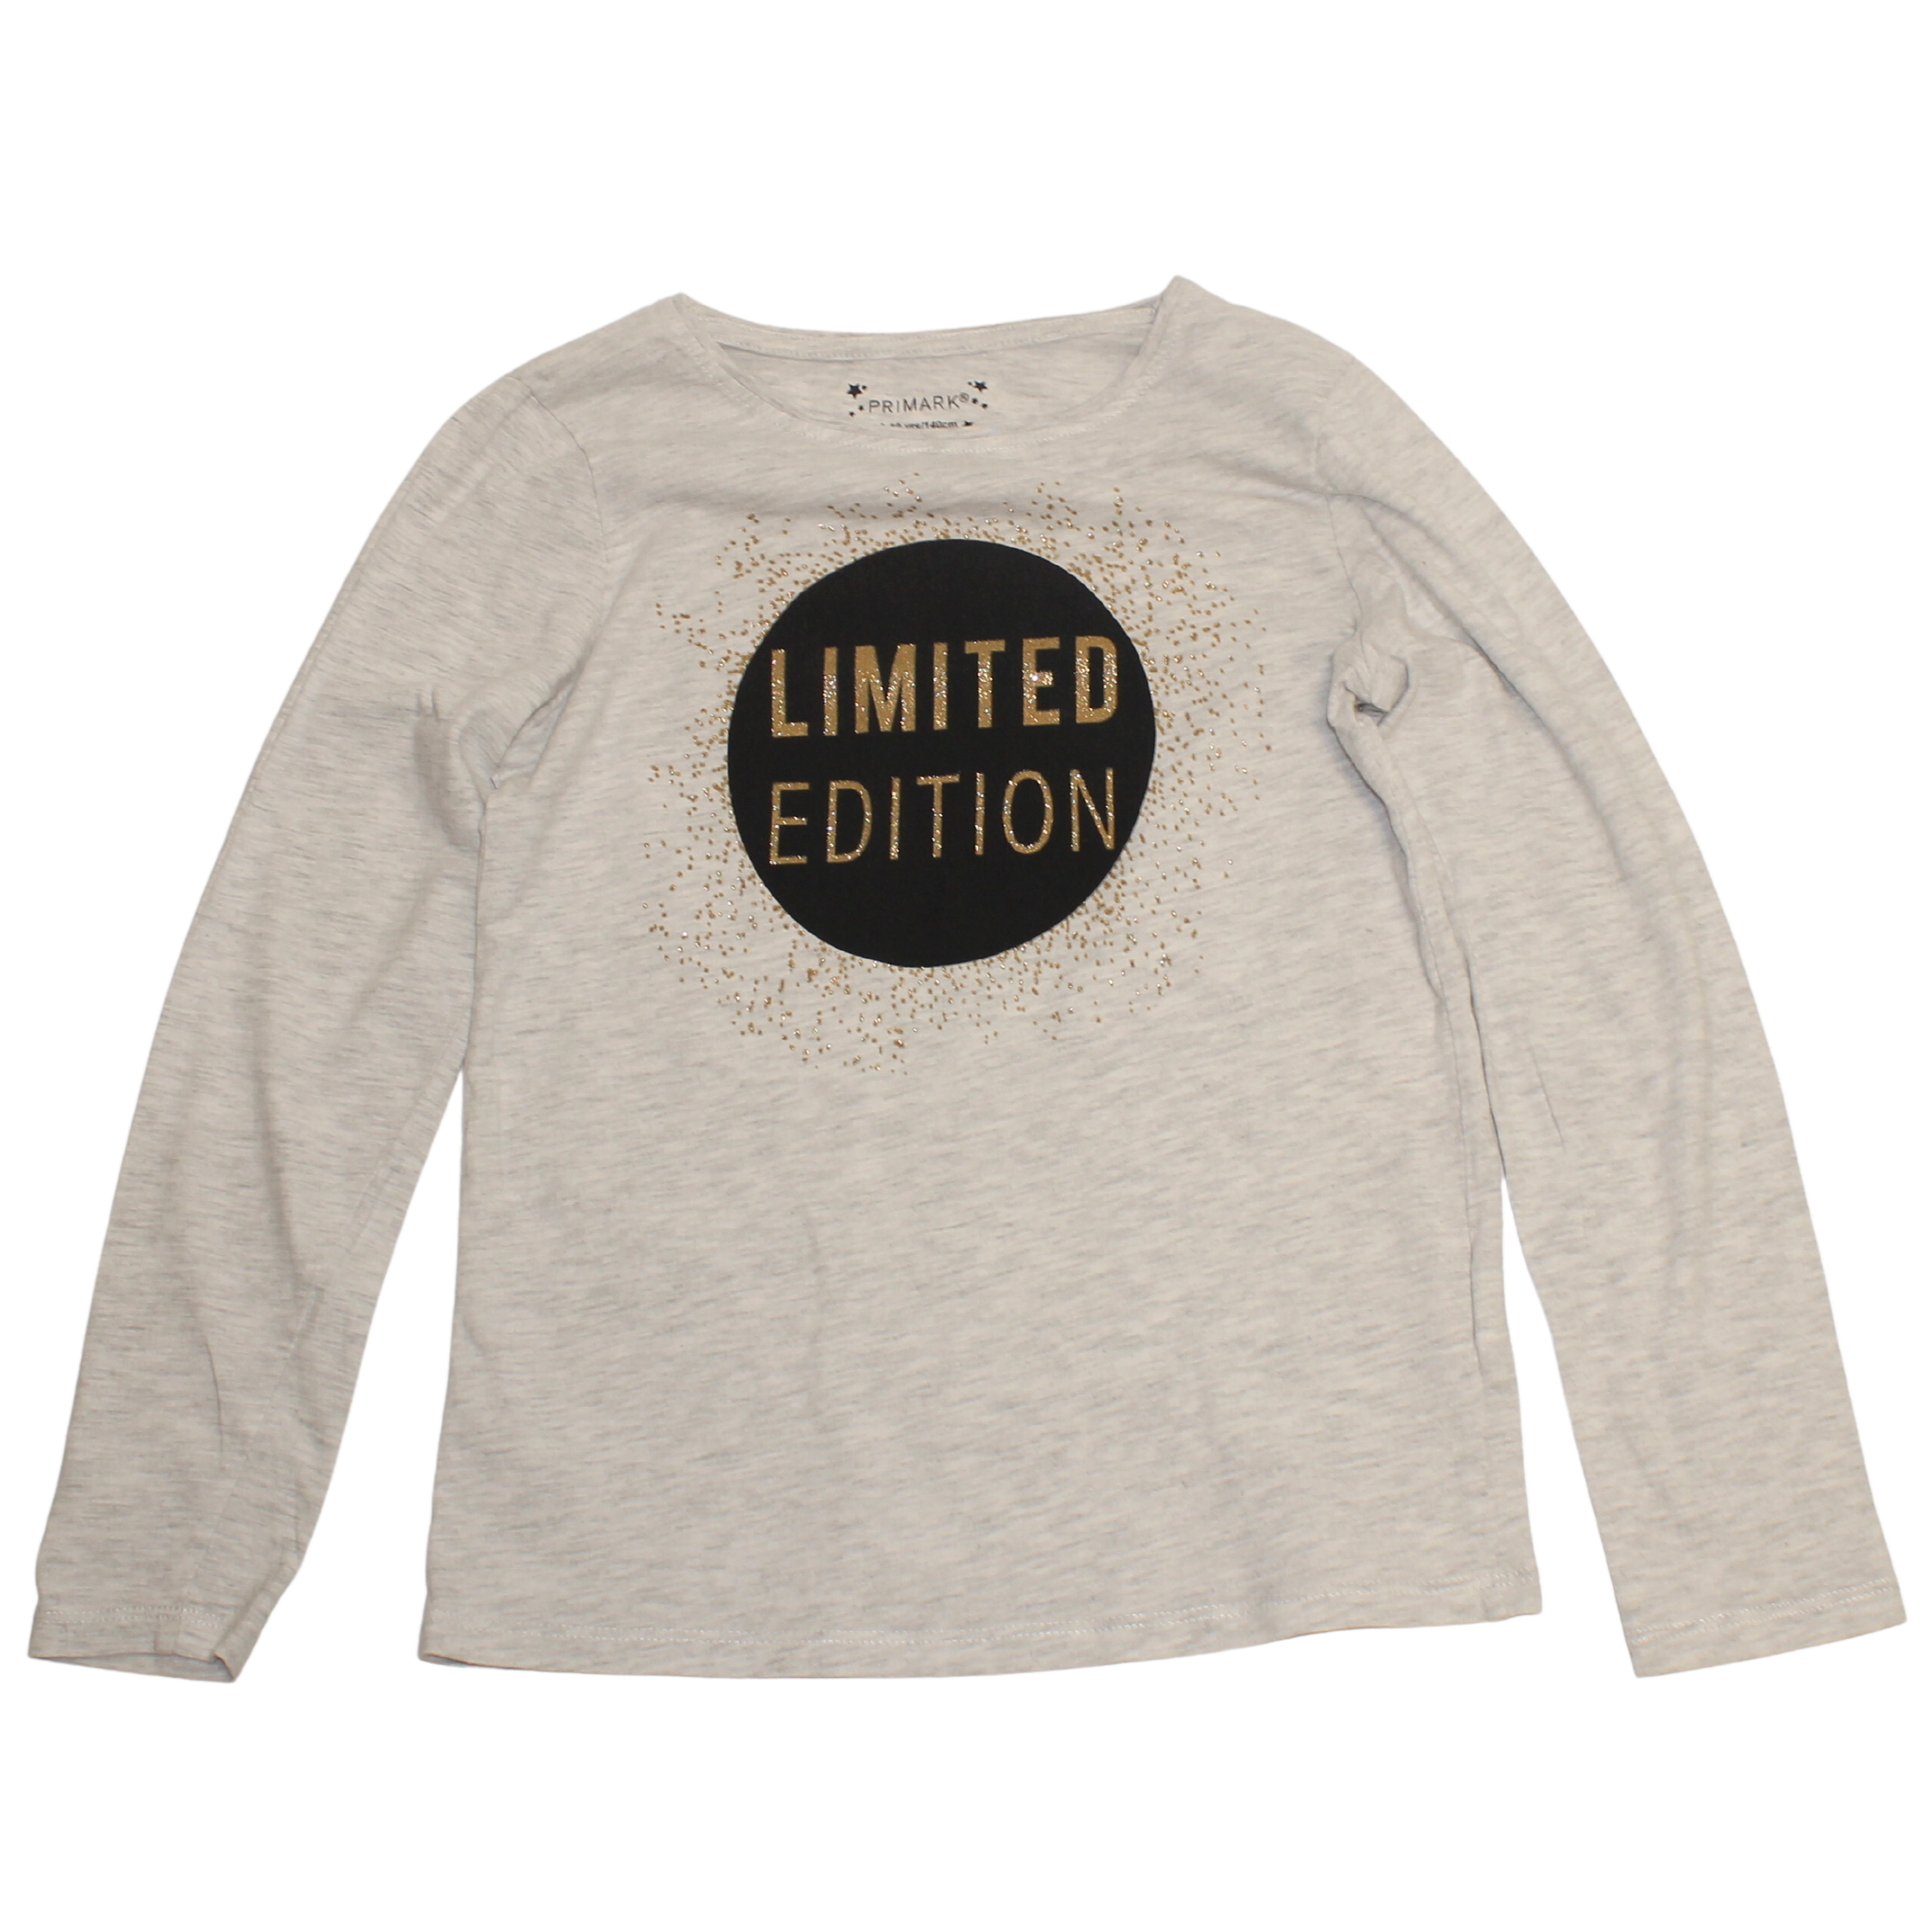 Limited Edition Long Sleeved Top